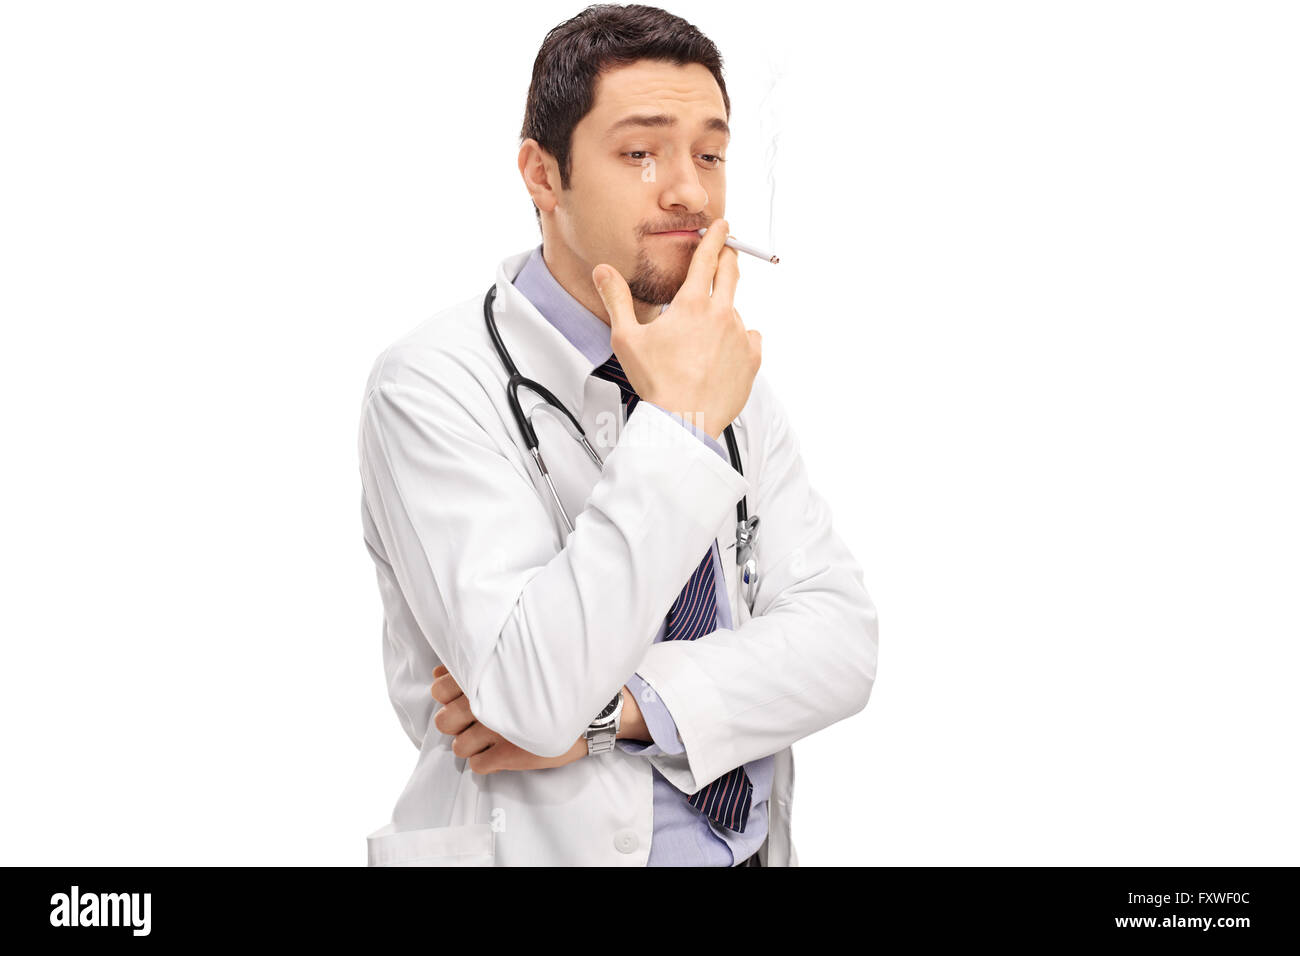 Careless doctor smoking a cigarette isolated on white background Stock Photo